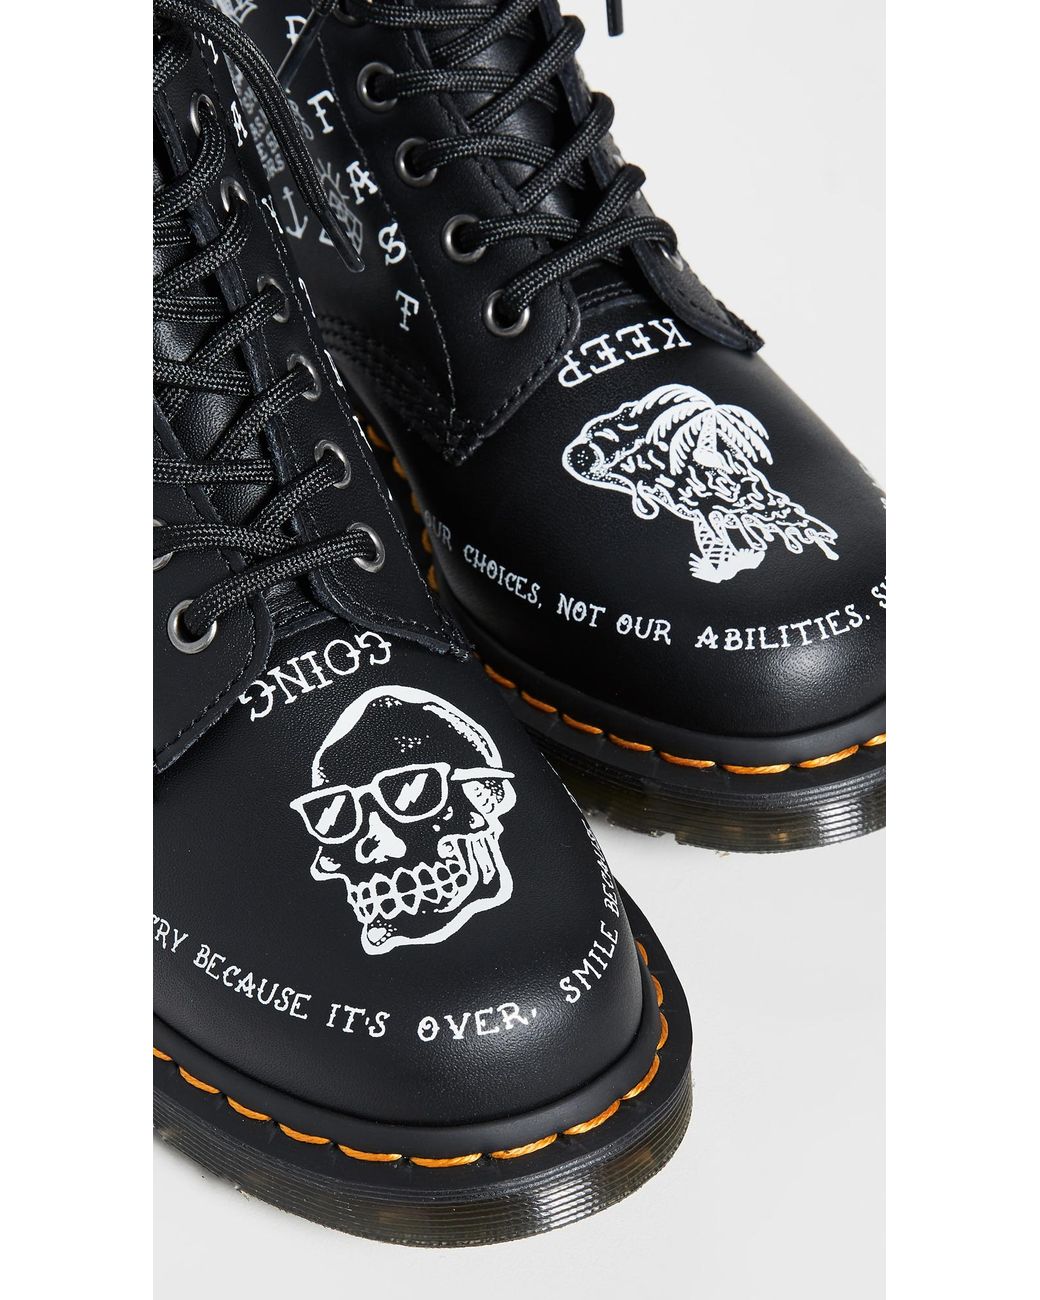 Dr. Martens Leather 1460 Scribble 8 Eye Boots in Black/White (Black) | Lyst